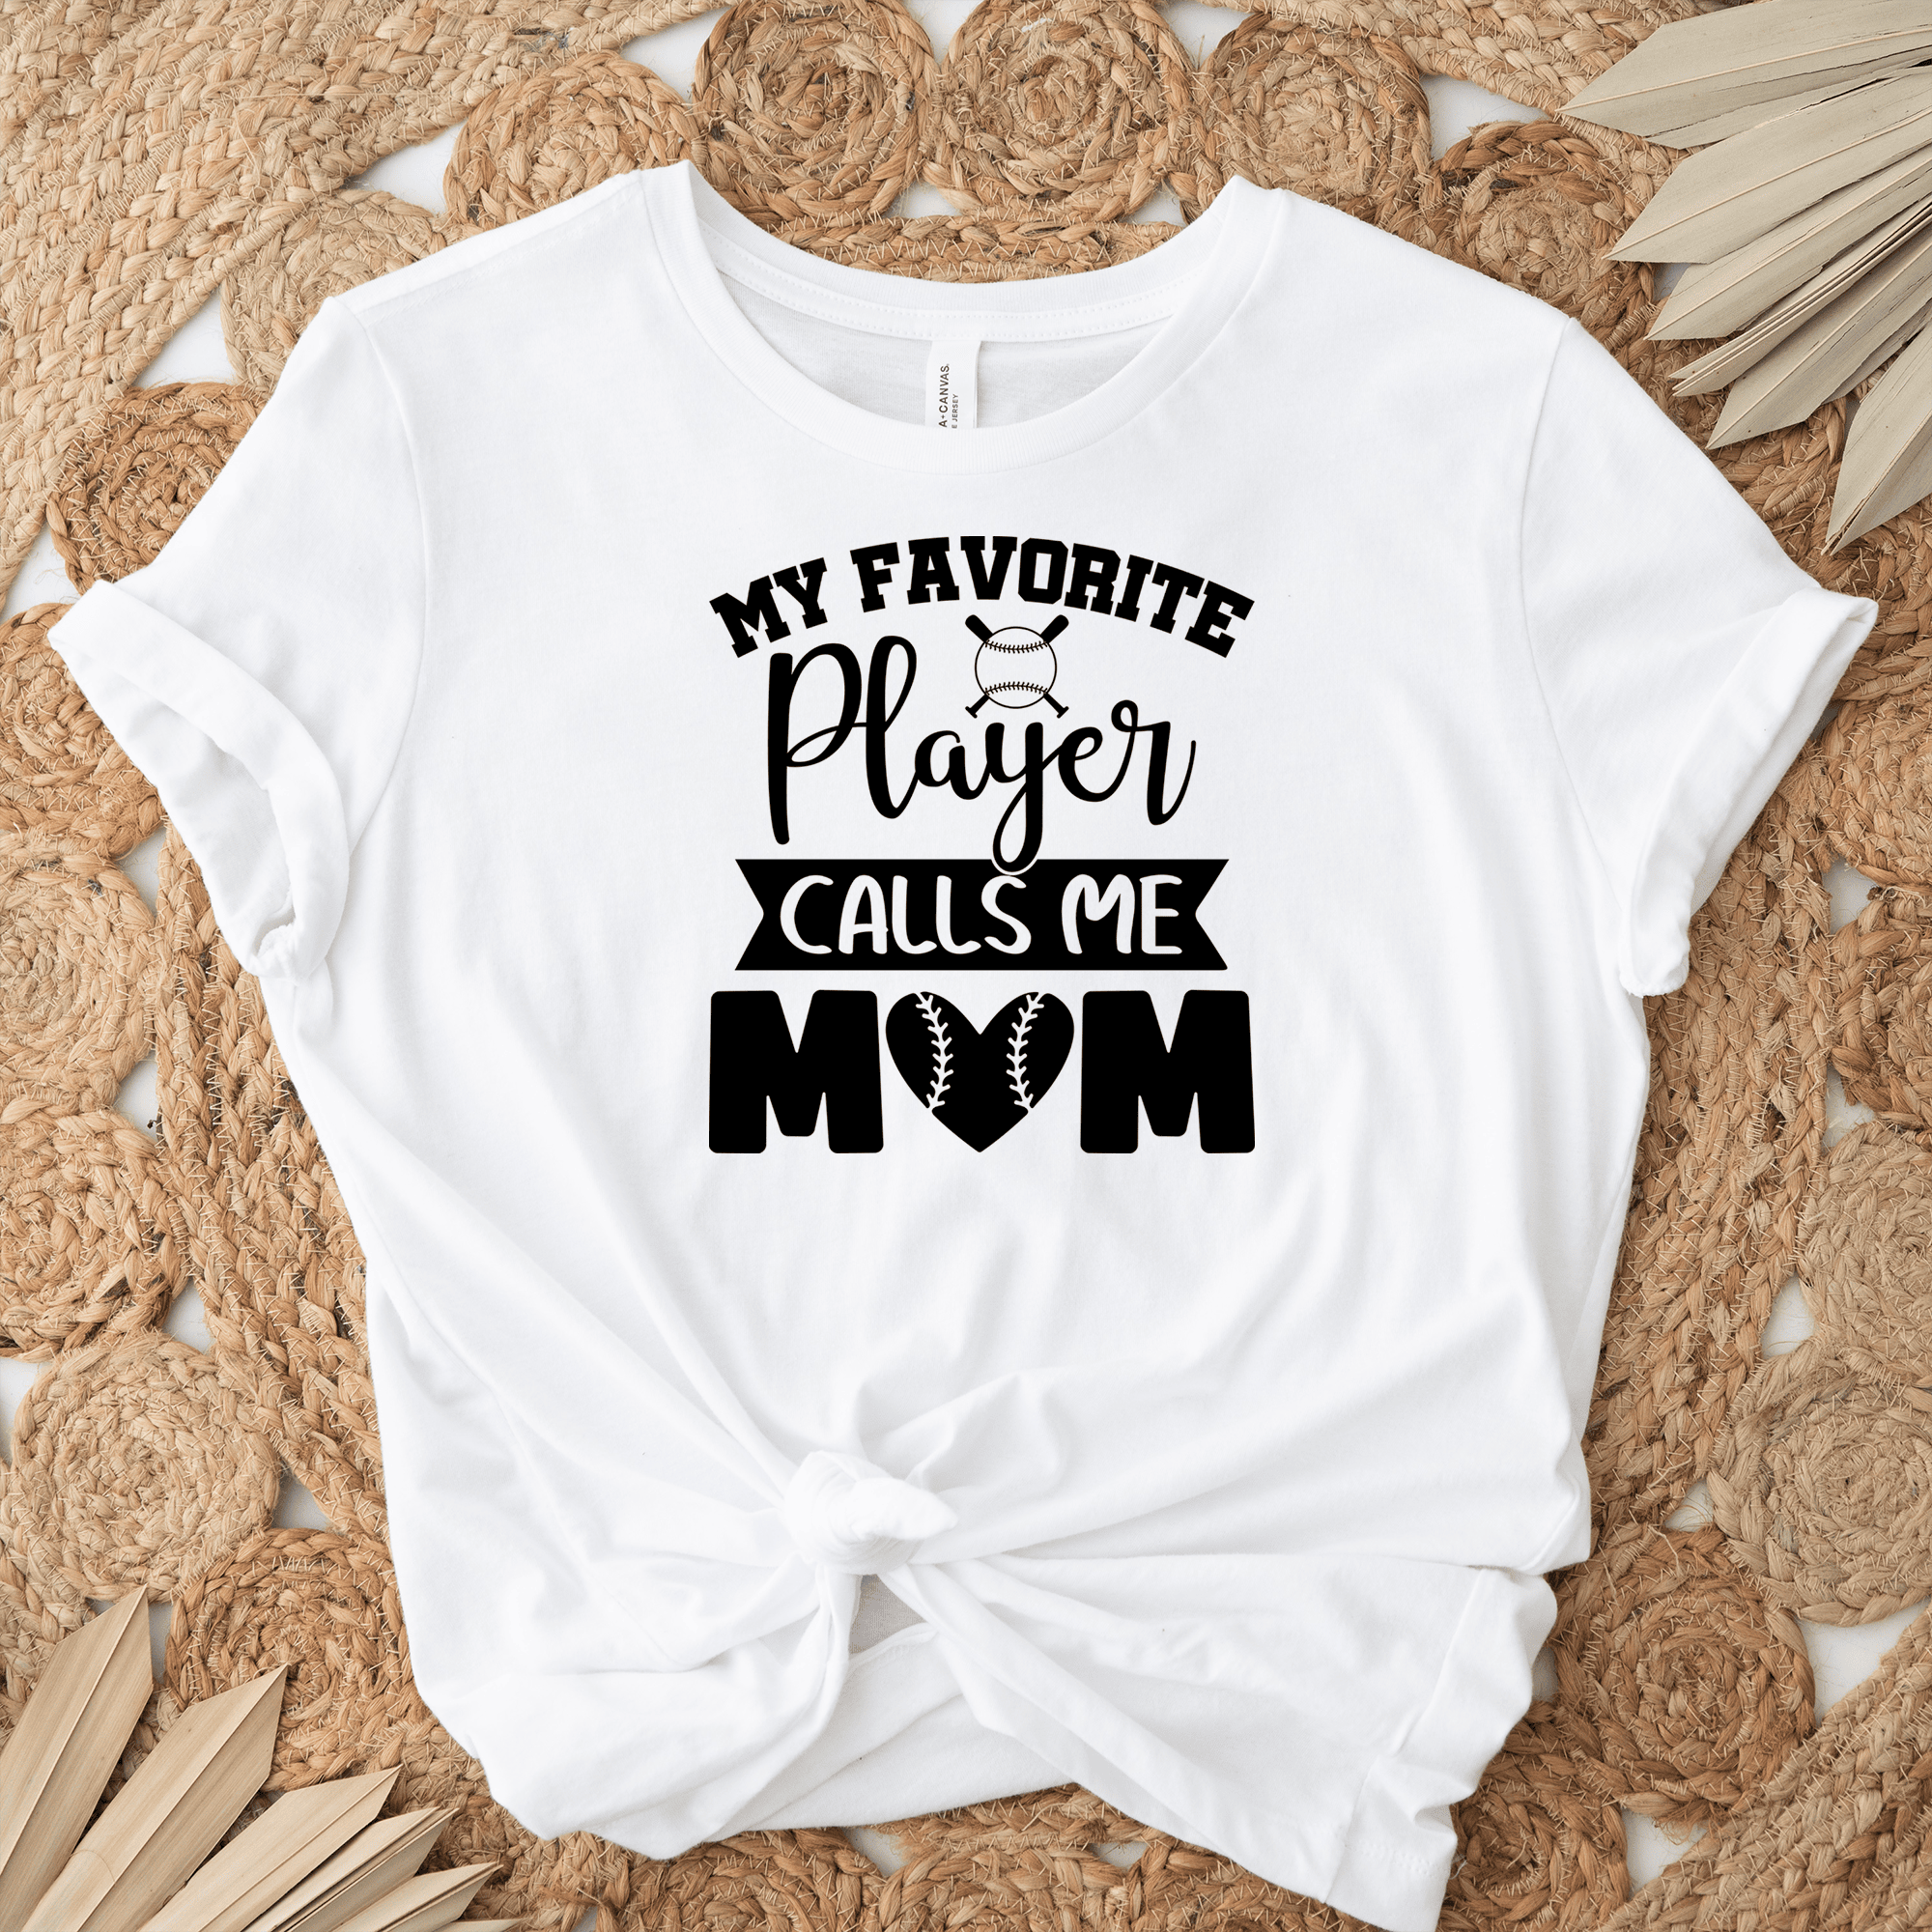 Womens White T Shirt with My-Favorite-Athlete-Calls-Me-Mom design